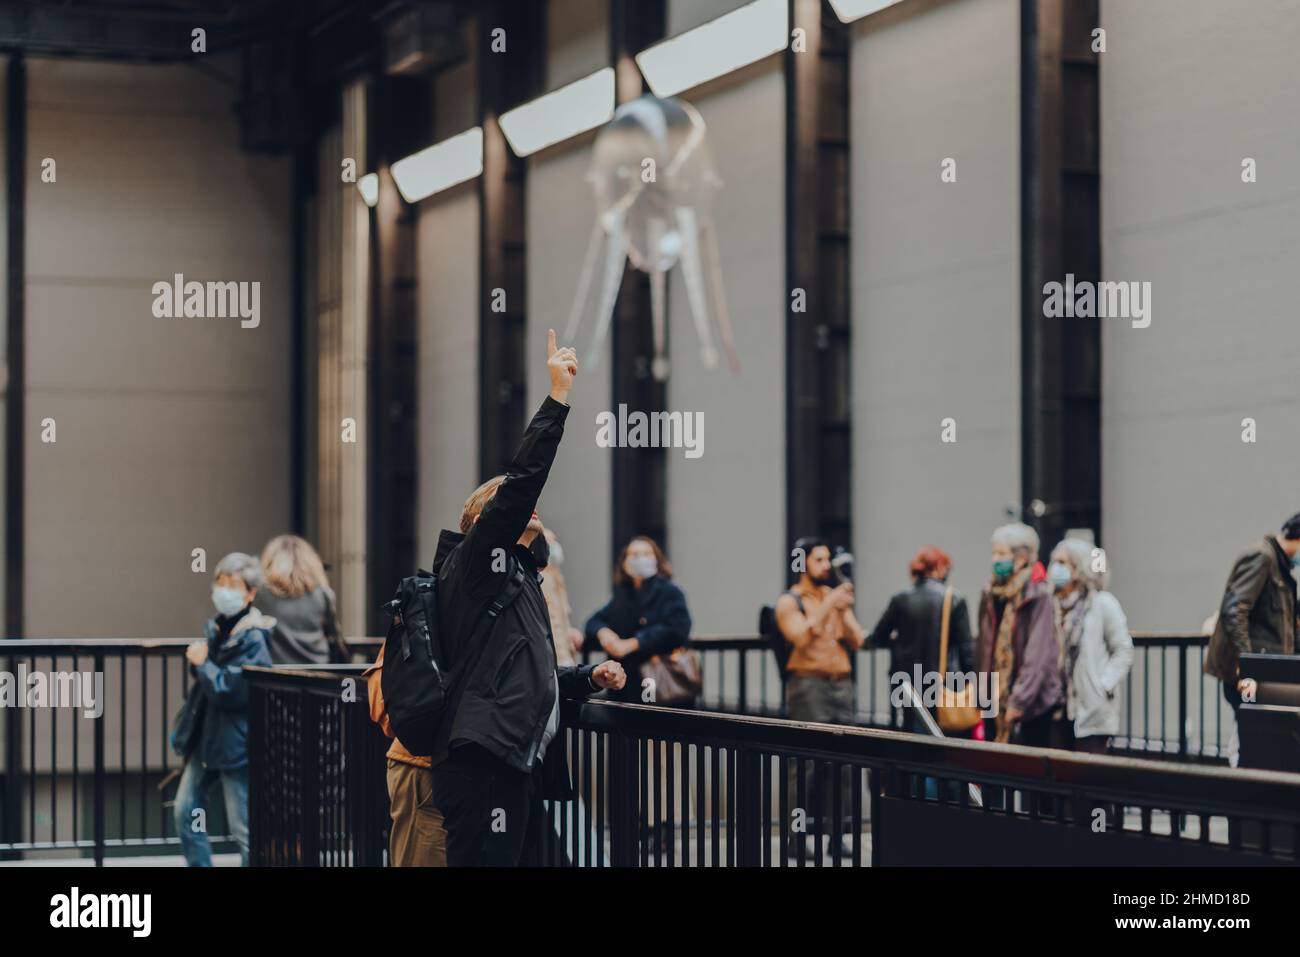 London, UK - October 23, 2021: Man watches aerobes of Anicka Yi's installation In Love With The World in Turbine Hall of Tate Modern,a museum in Londo Stock Photo